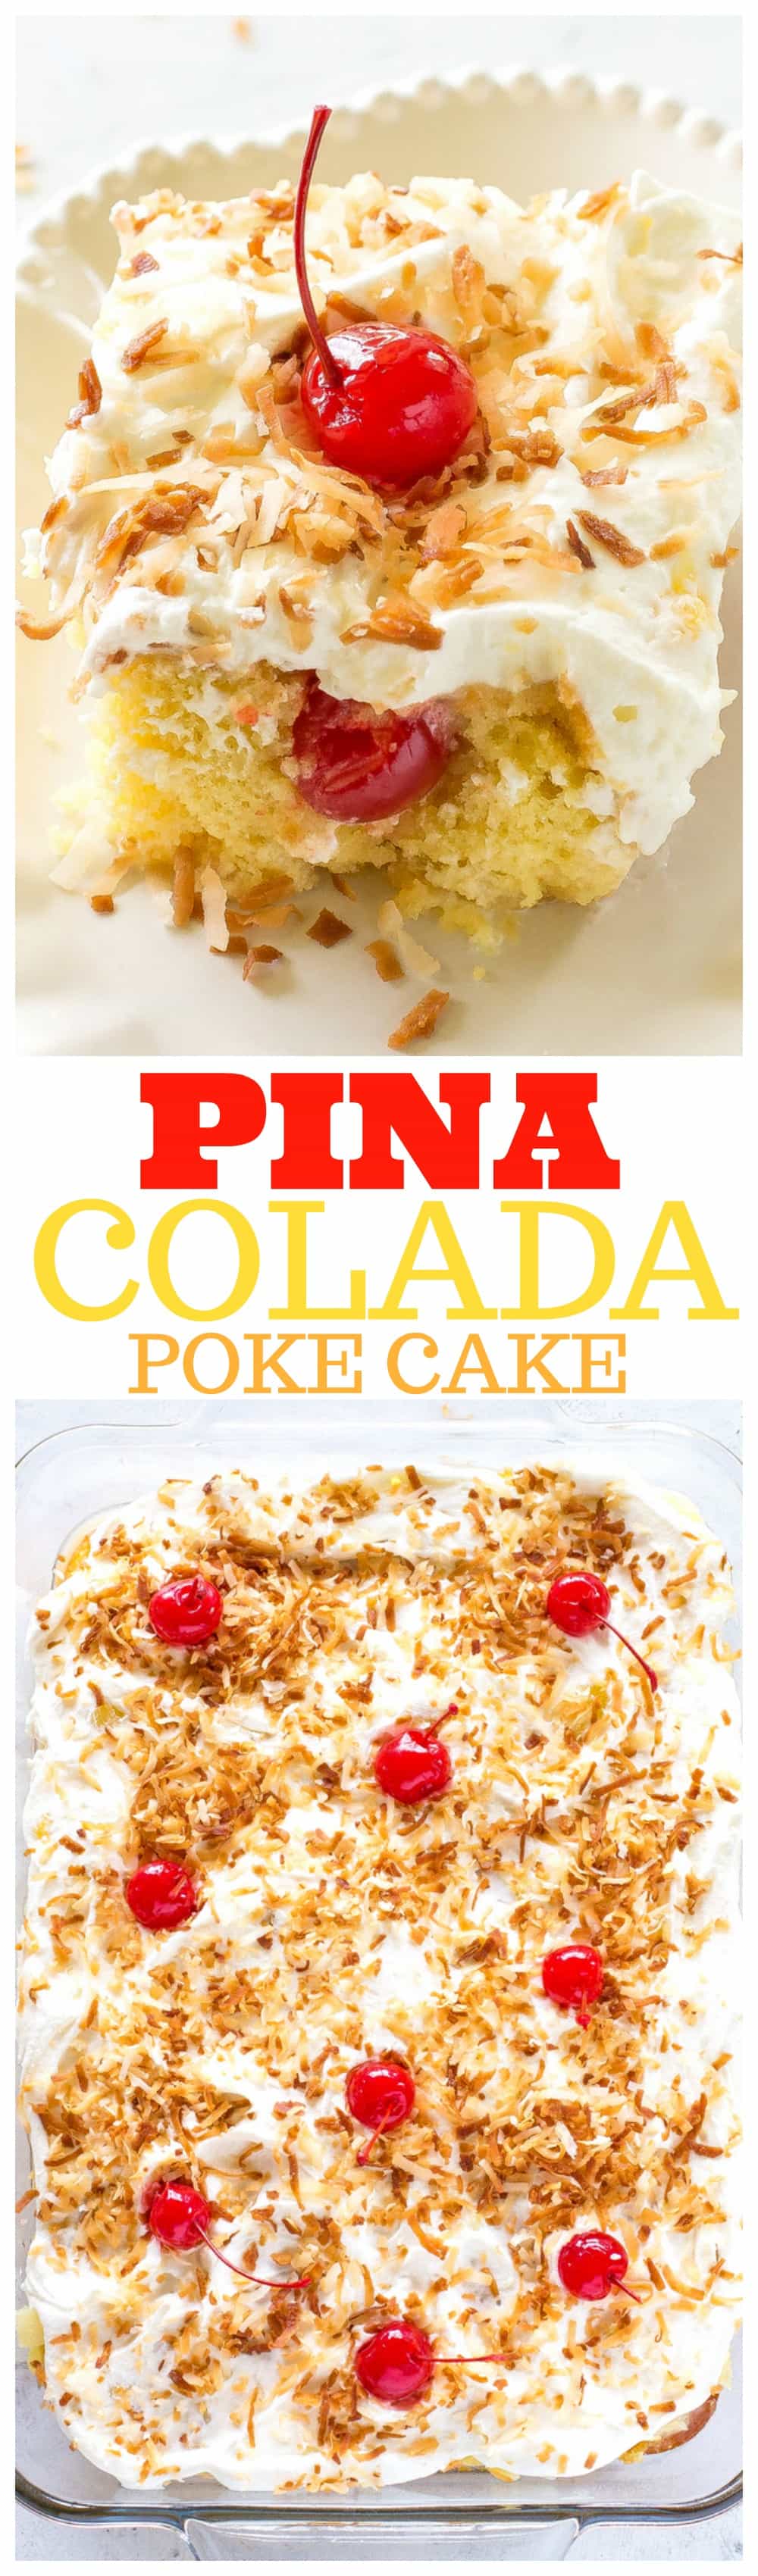 Pina Colada Poke Cake - drizzled with coconut and pineapple and topped with coconut whipped cream and toasted coconut, this cake is the best summer cake out there. #pina #colada #poke #cake #dessert #recipe